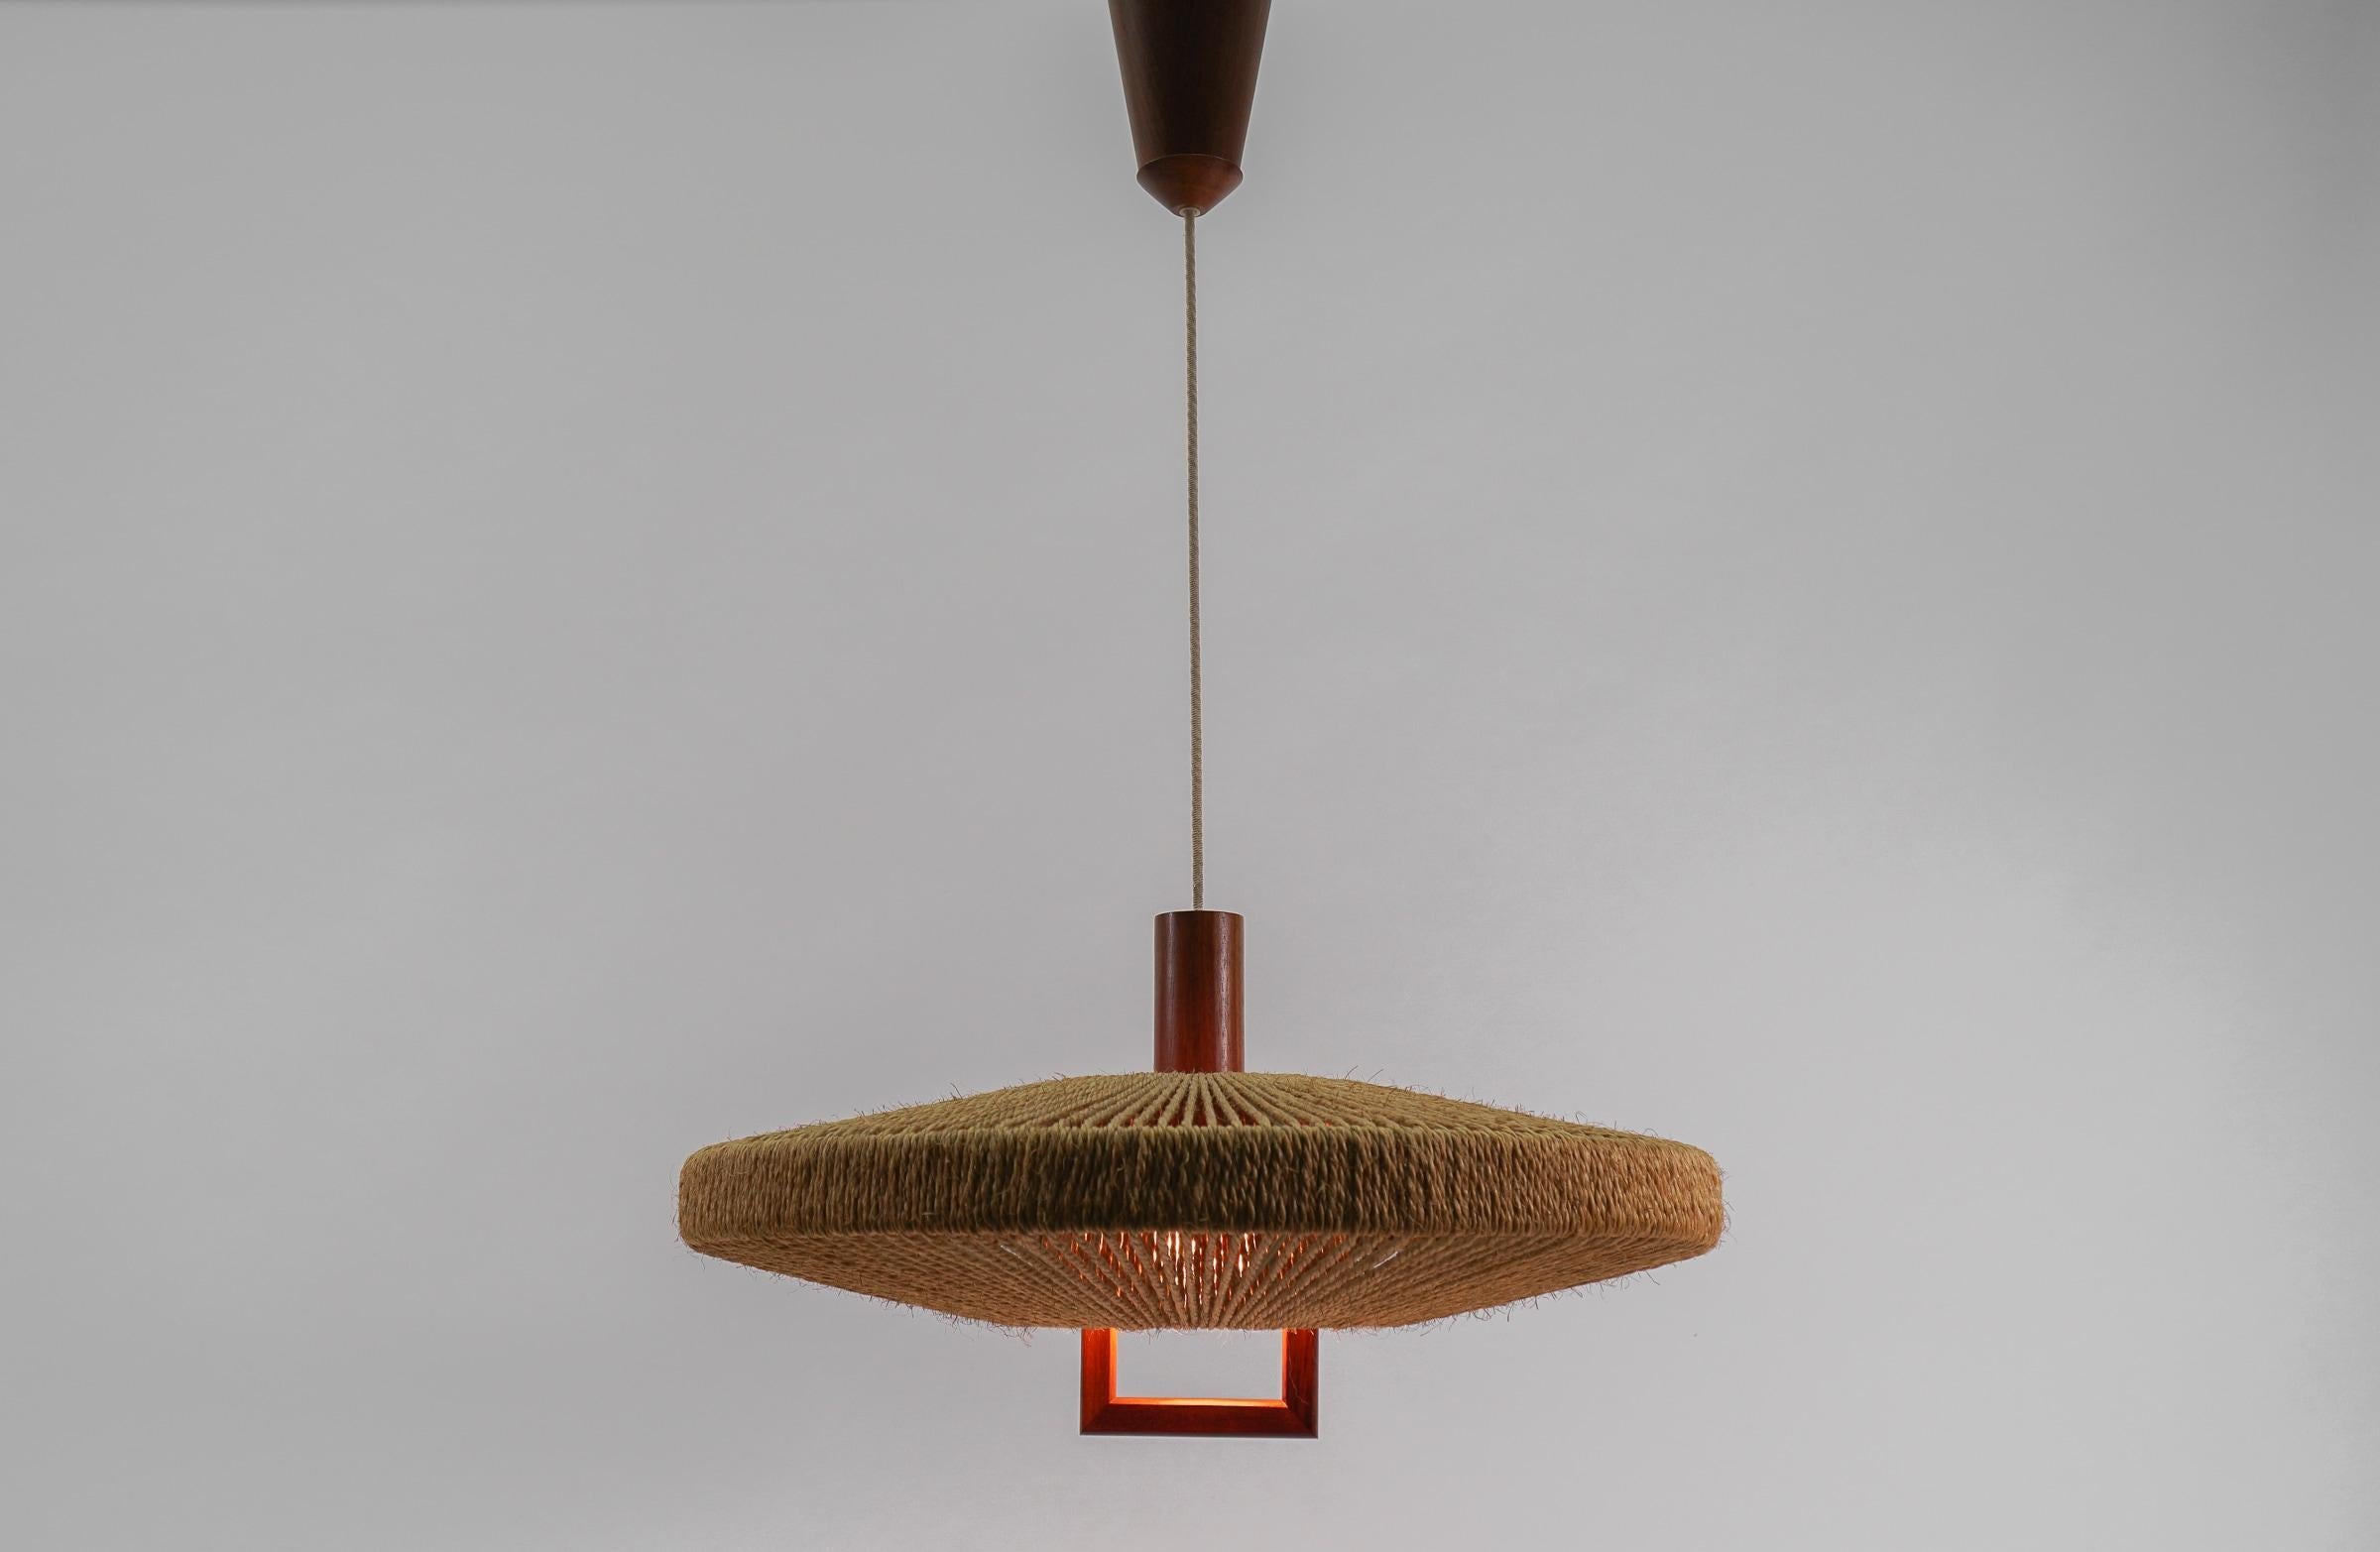 Large shapely teak lamp with jute cord weave.

Adjustable from 60cm to 160cm. 

The lamp is executed with one E27 Edison screw fit bulb. It is wired and in working condition. It runs both on 110 / 230 volt.

The small recess on the baldachin is for